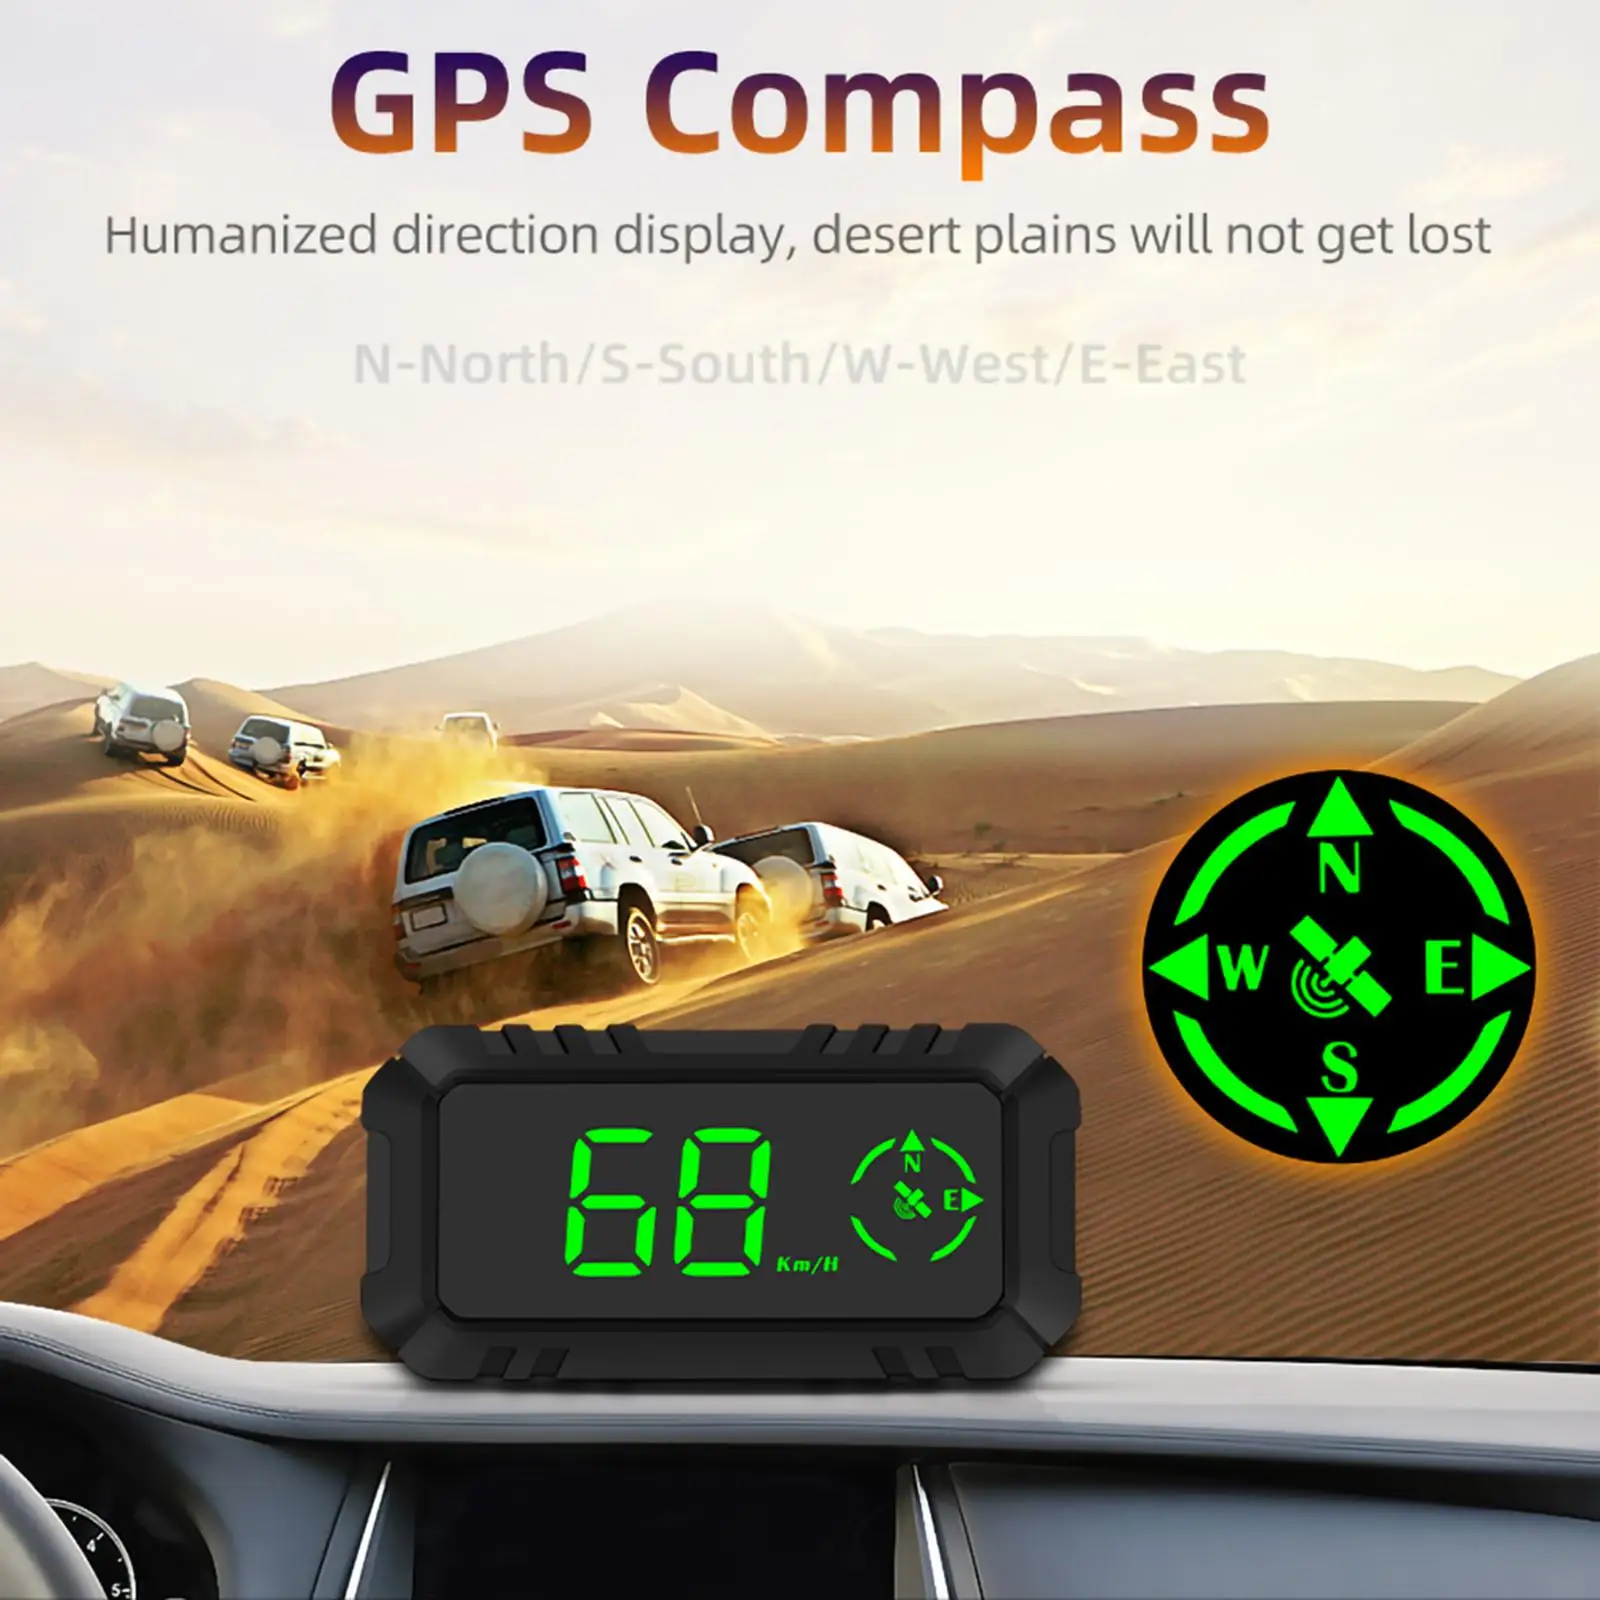  HUD  Display, Overspeed Warning Course Kmh/MPH Fatigue  GPS Windshield Projector Trip Meter Fit for Vehicle Truck